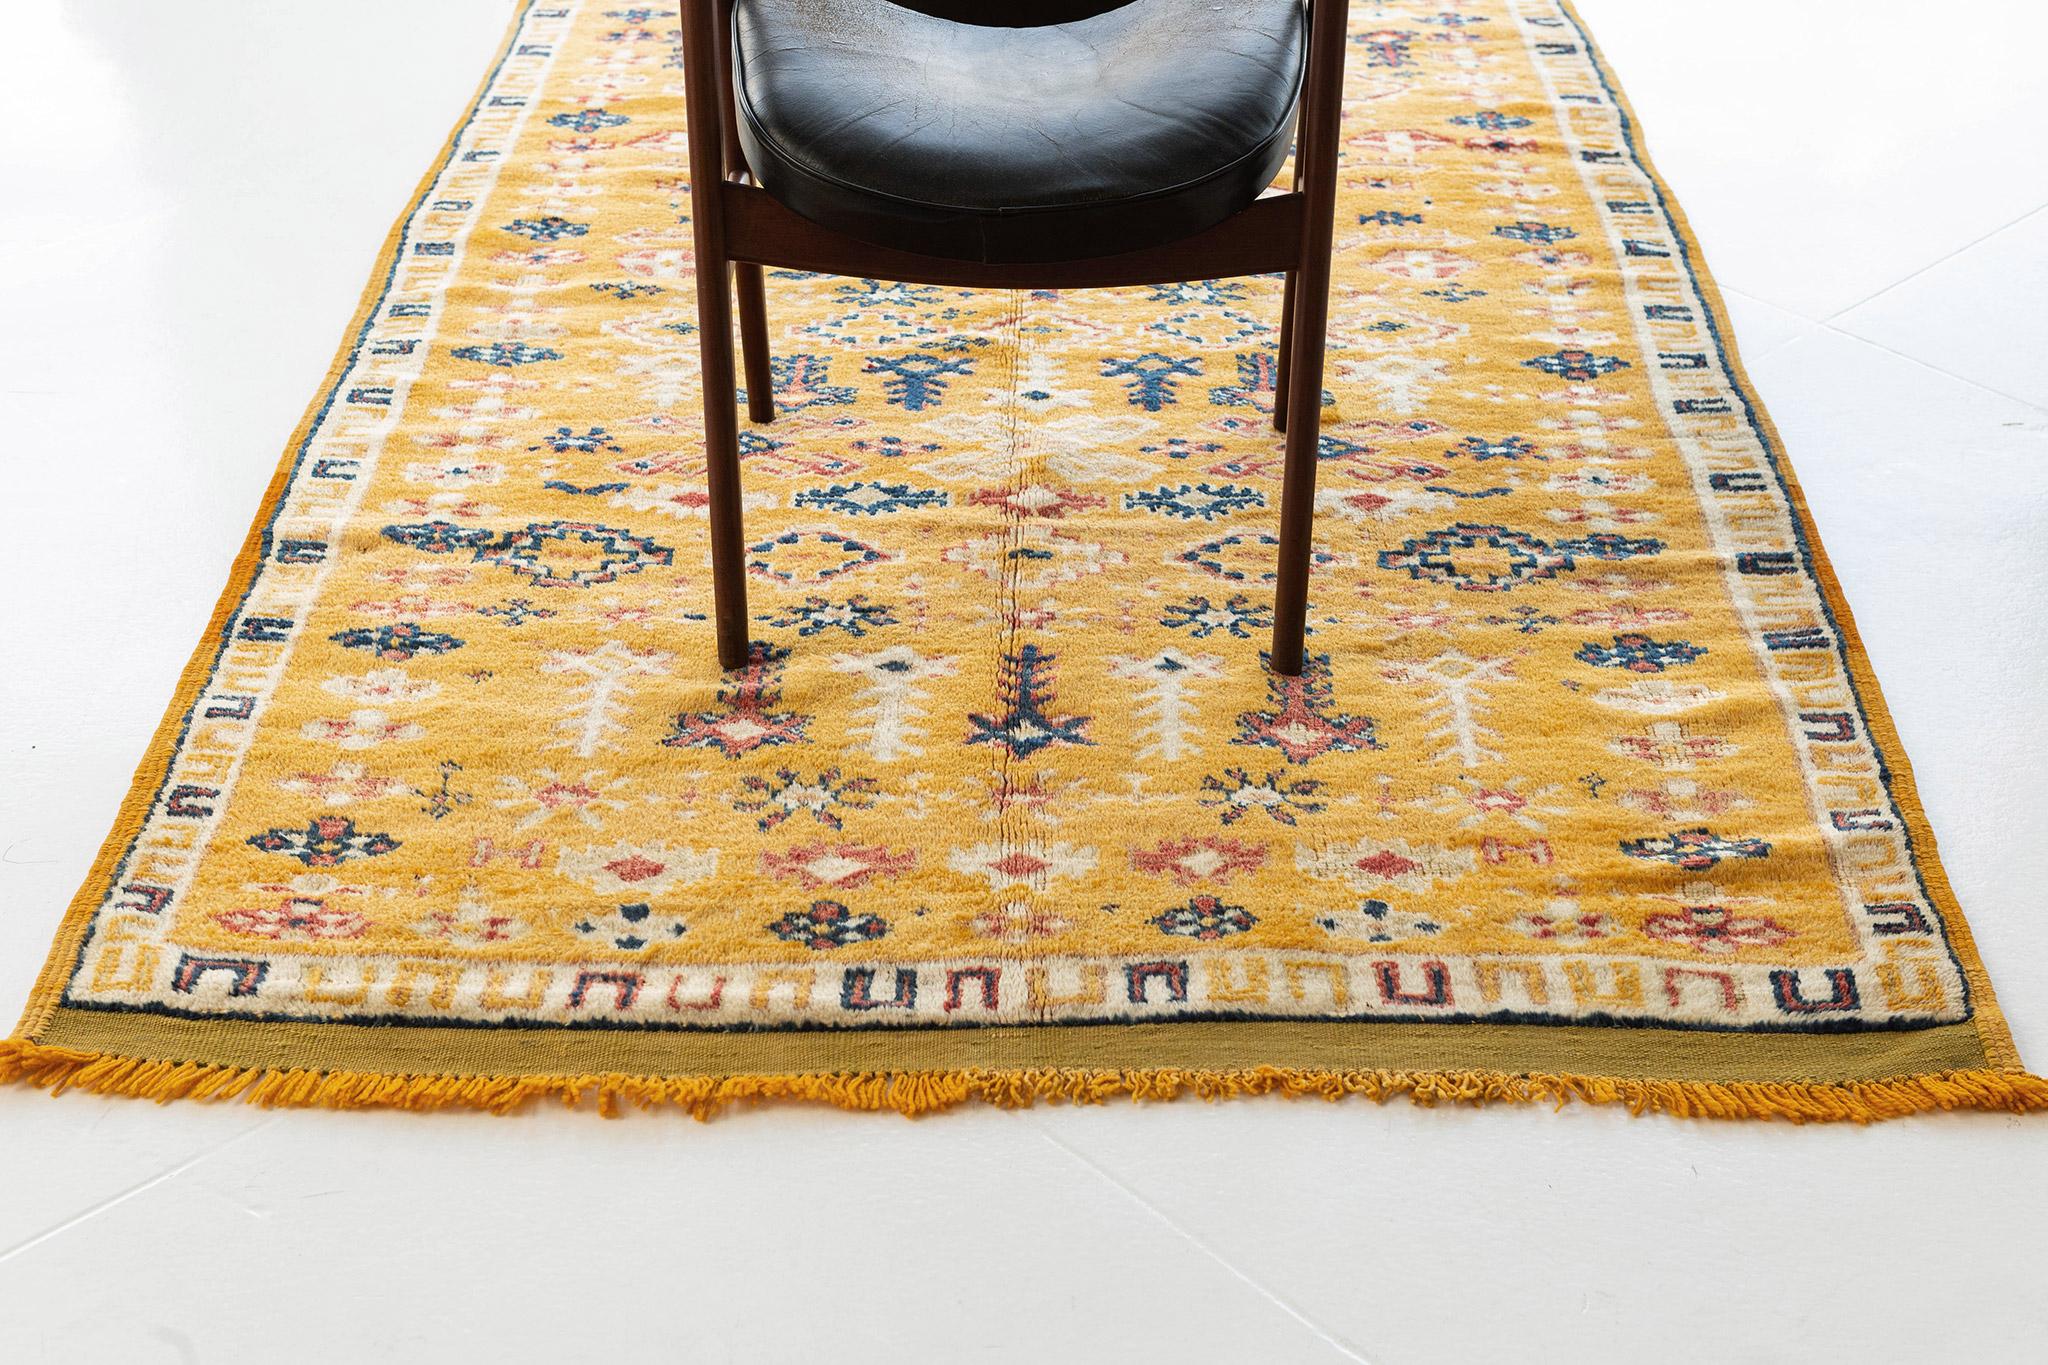 A captivating Vintage Moroccan rug in High Atlas Tribe Collection that features a variety of elaborate symmetrical motifs all over the golden field emanating its vibrant tribal feel. Moroccan rugs are known for the symbolism that is meticulously